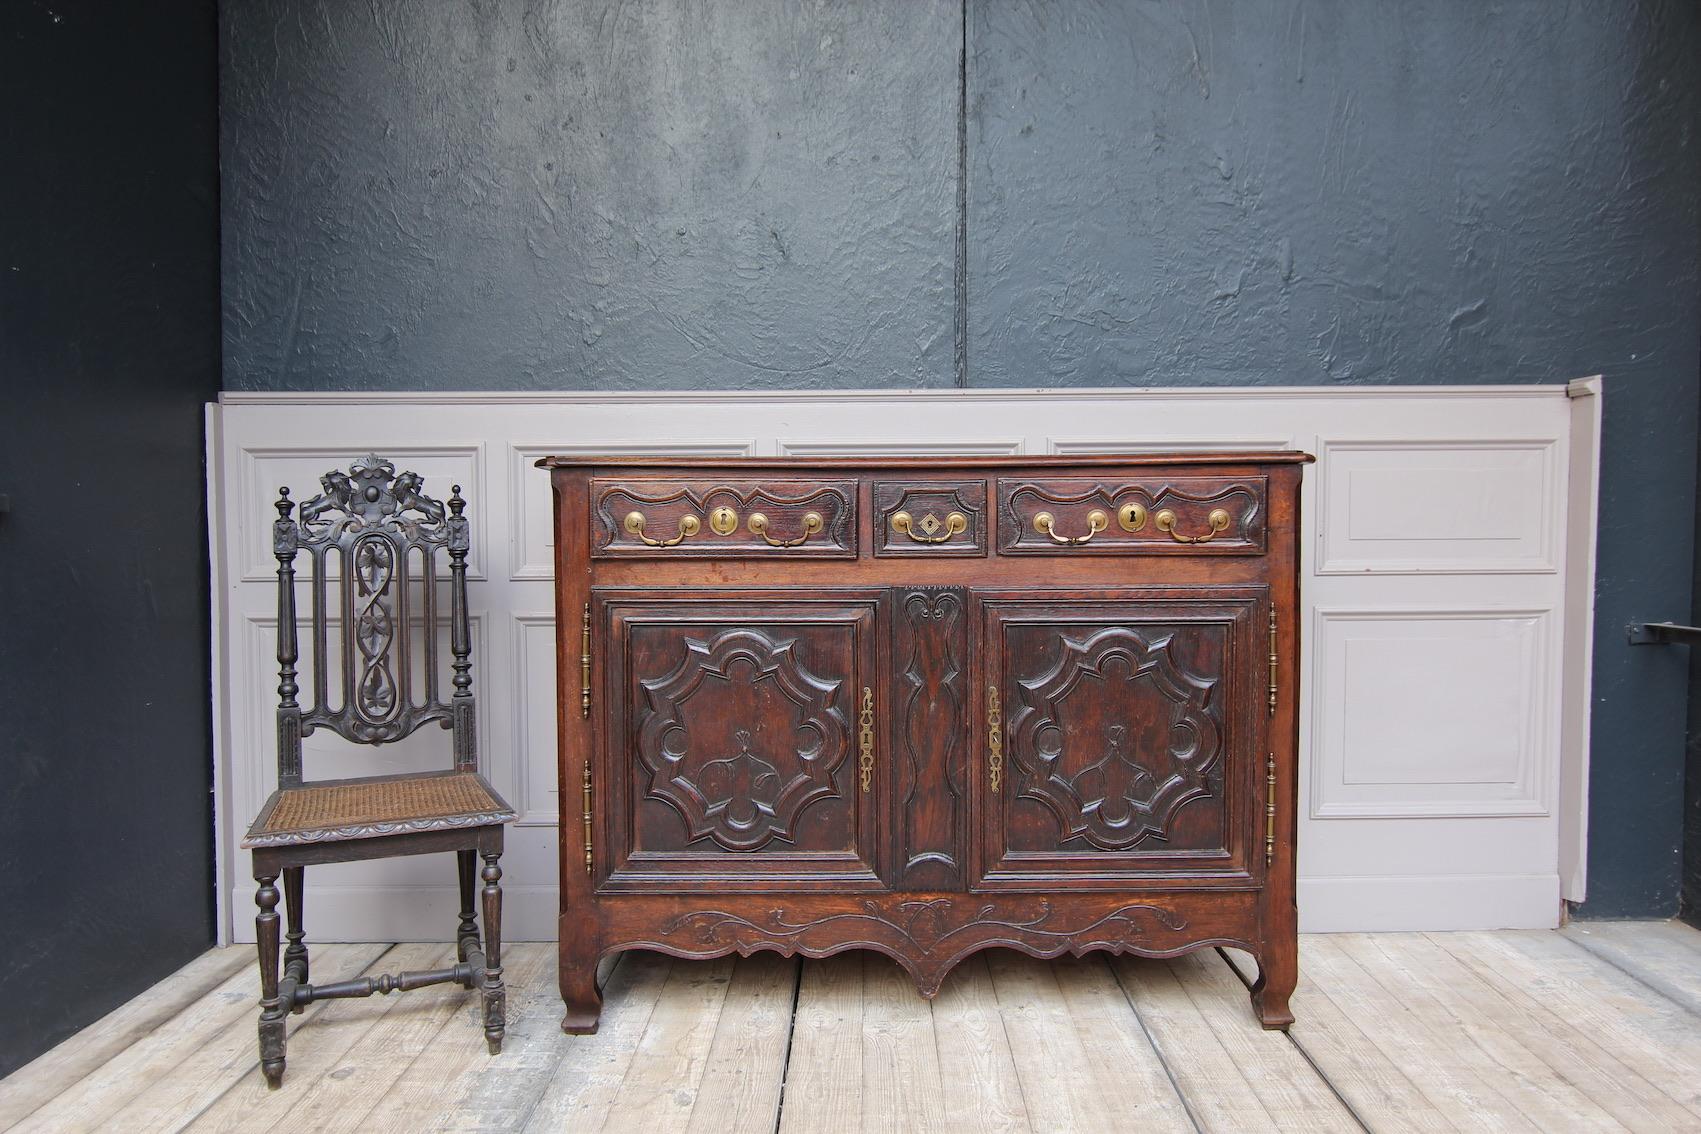 French sideboard made of oak. Lorraine, circa 1780.

Body with 2 doors on outside brass fittings and 3 drawers above with large brass handles.
Equipped with a shelf inside.

Dimensions: 
112 cm high / 44.09 inch high,
149 cm wide / 58.66 inch